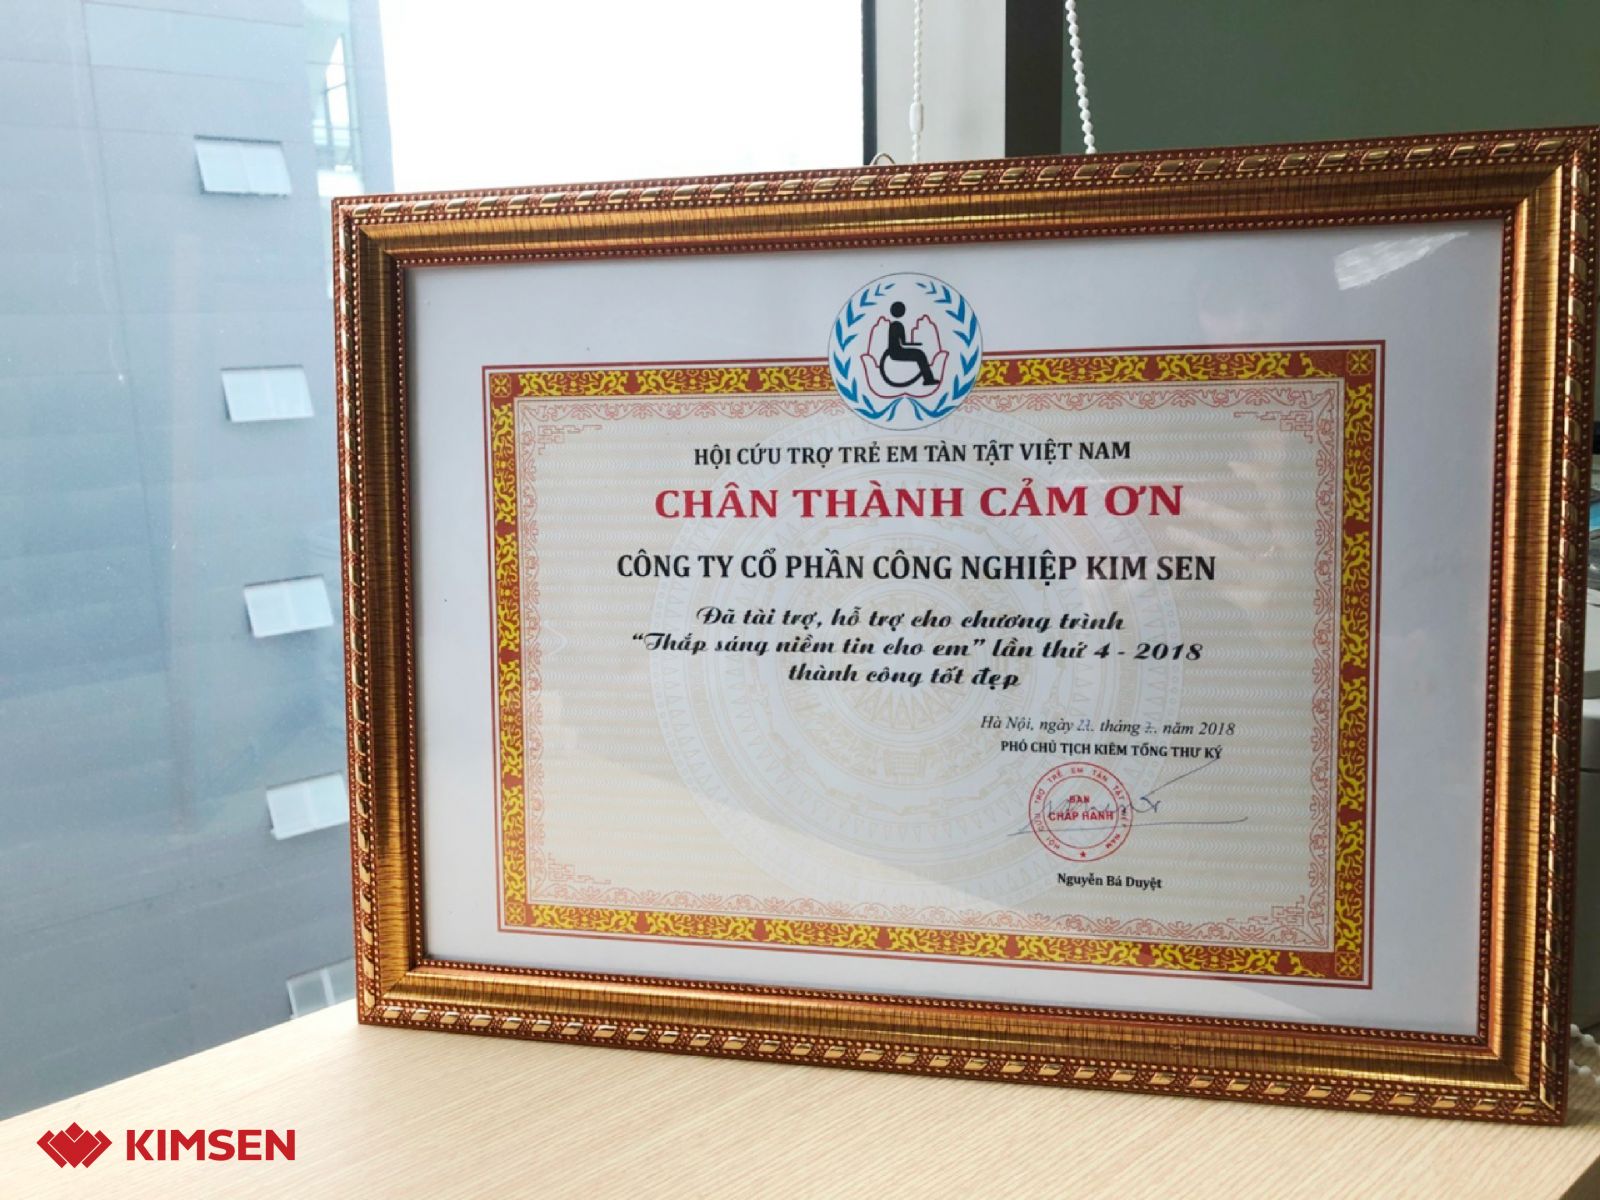 KIMSEN accompanies and contributes to the activities of the Vietnam Relief Association for Handicapped Children